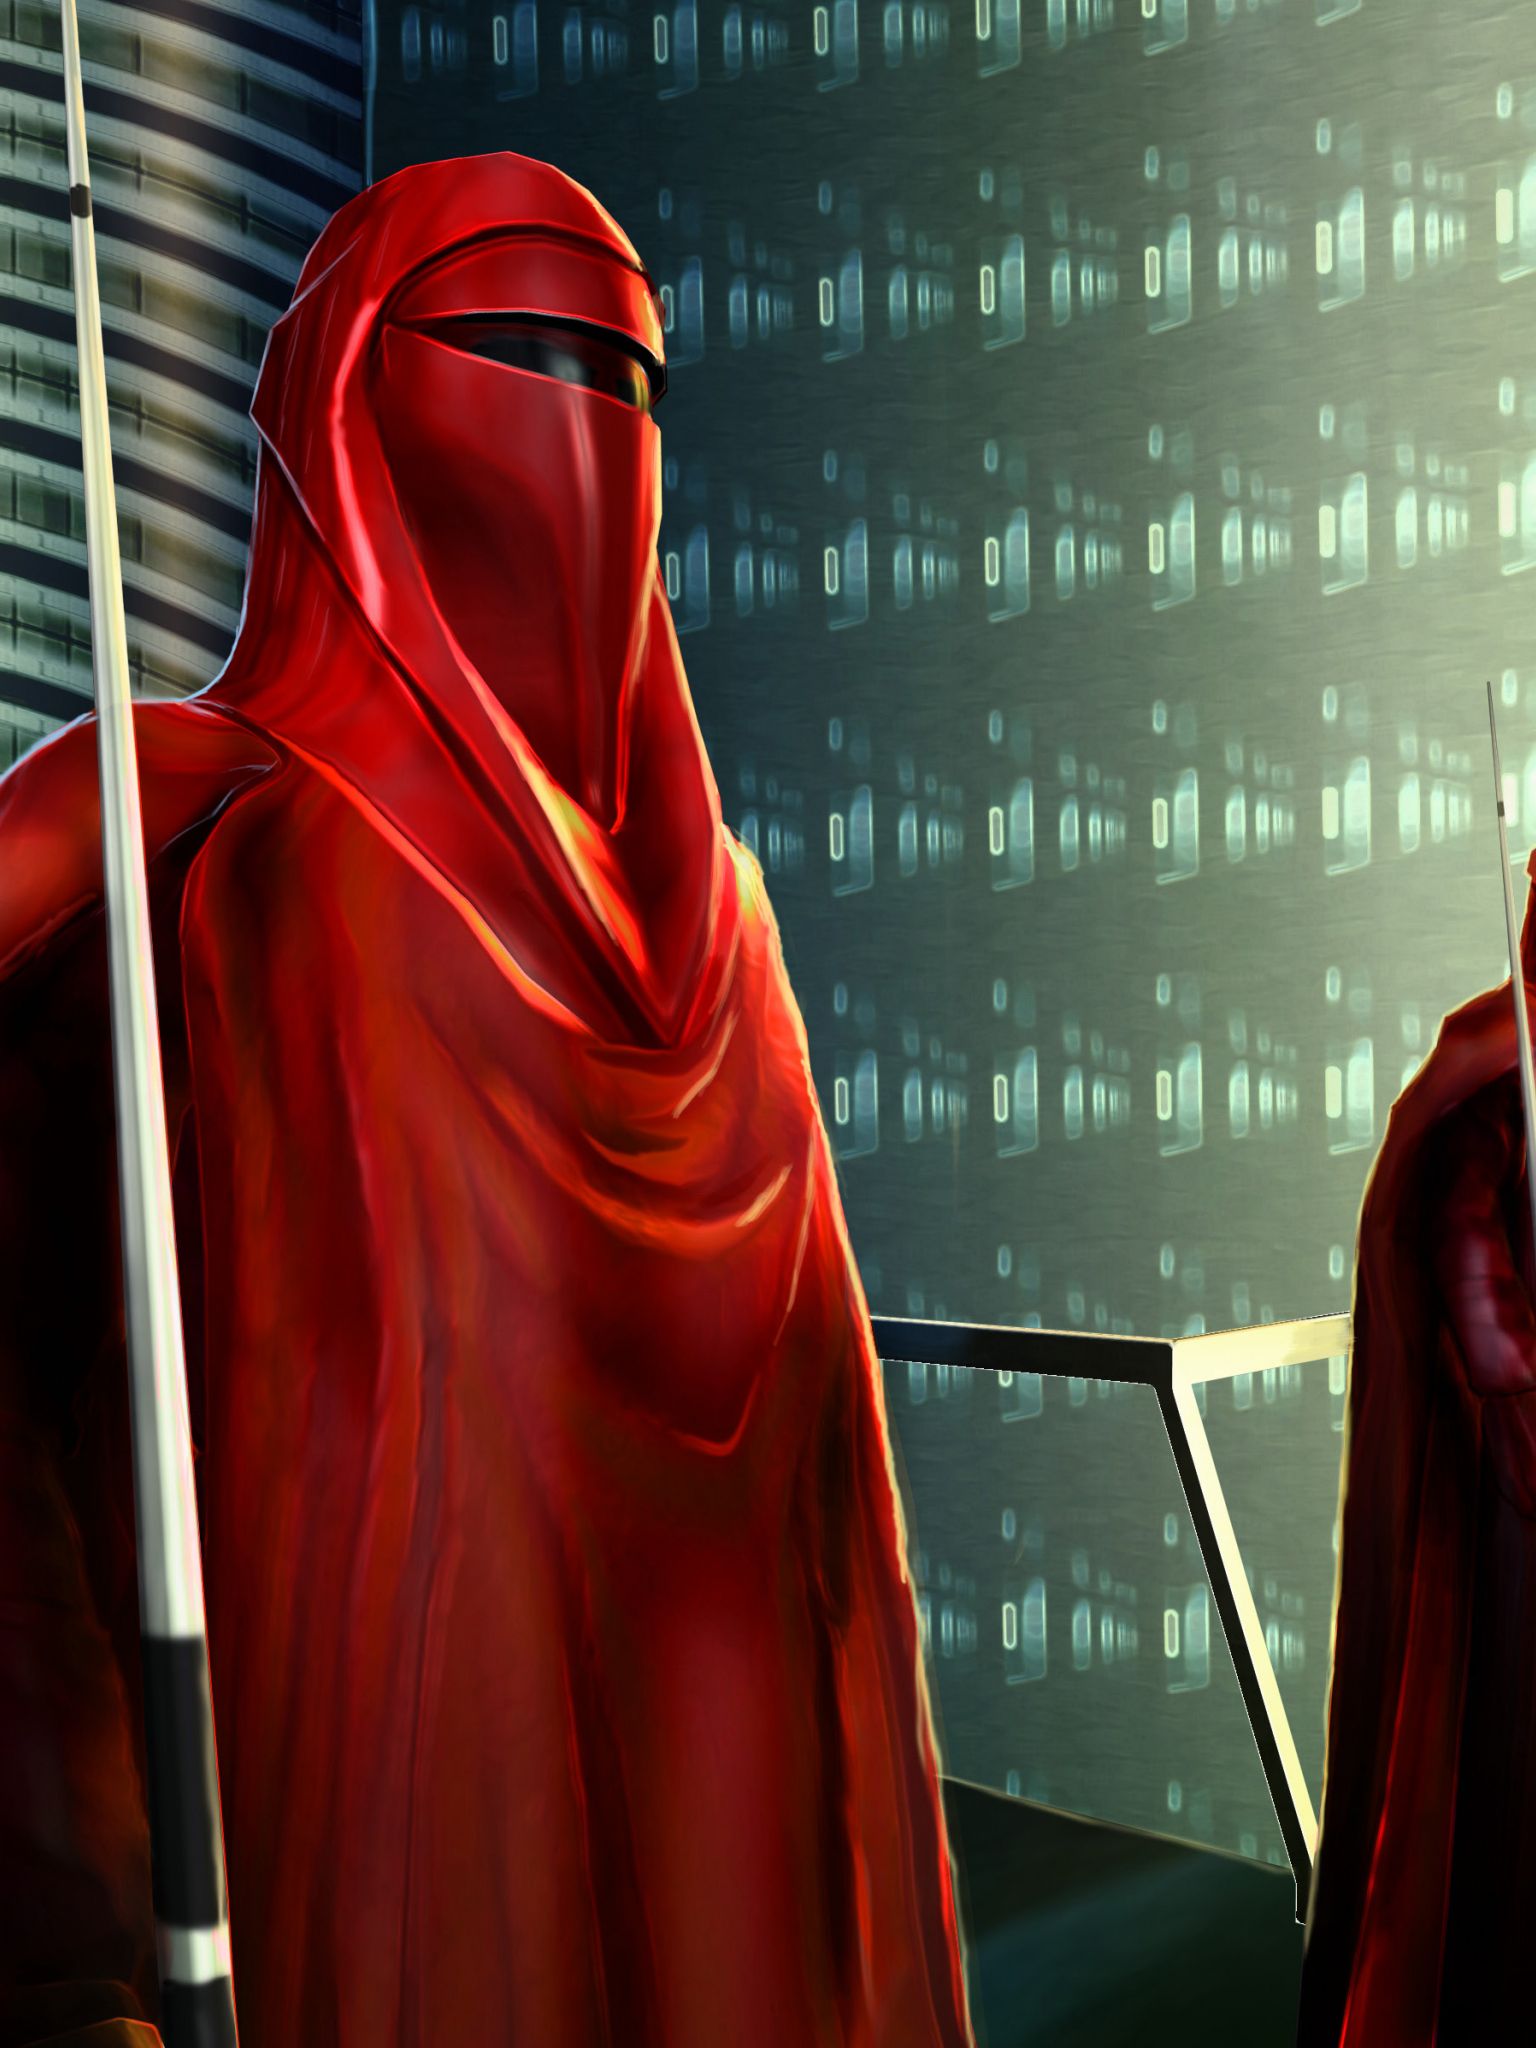 Free download Imperial Royal Guard [2986x2395] for your Desktop, Mobile & Tablet. Explore Star Wars Imperial Guard Wallpaper. Star Wars Wallpaper 1080p, Star Wars Desktop Wallpaper, Star Wars Sith Wallpaper